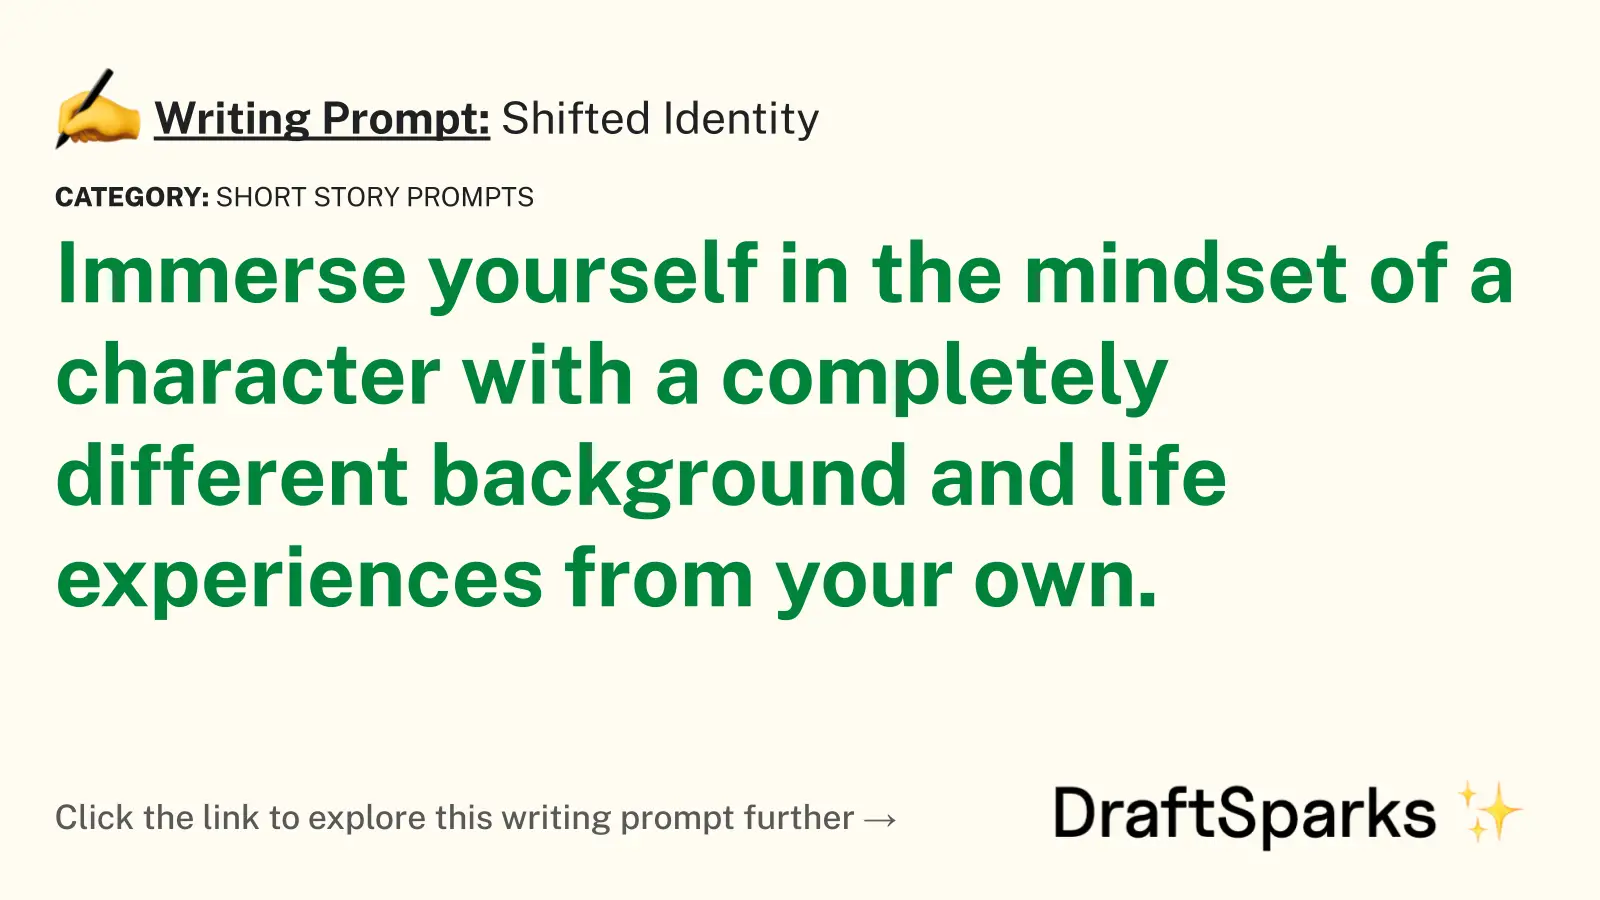 Shifted Identity